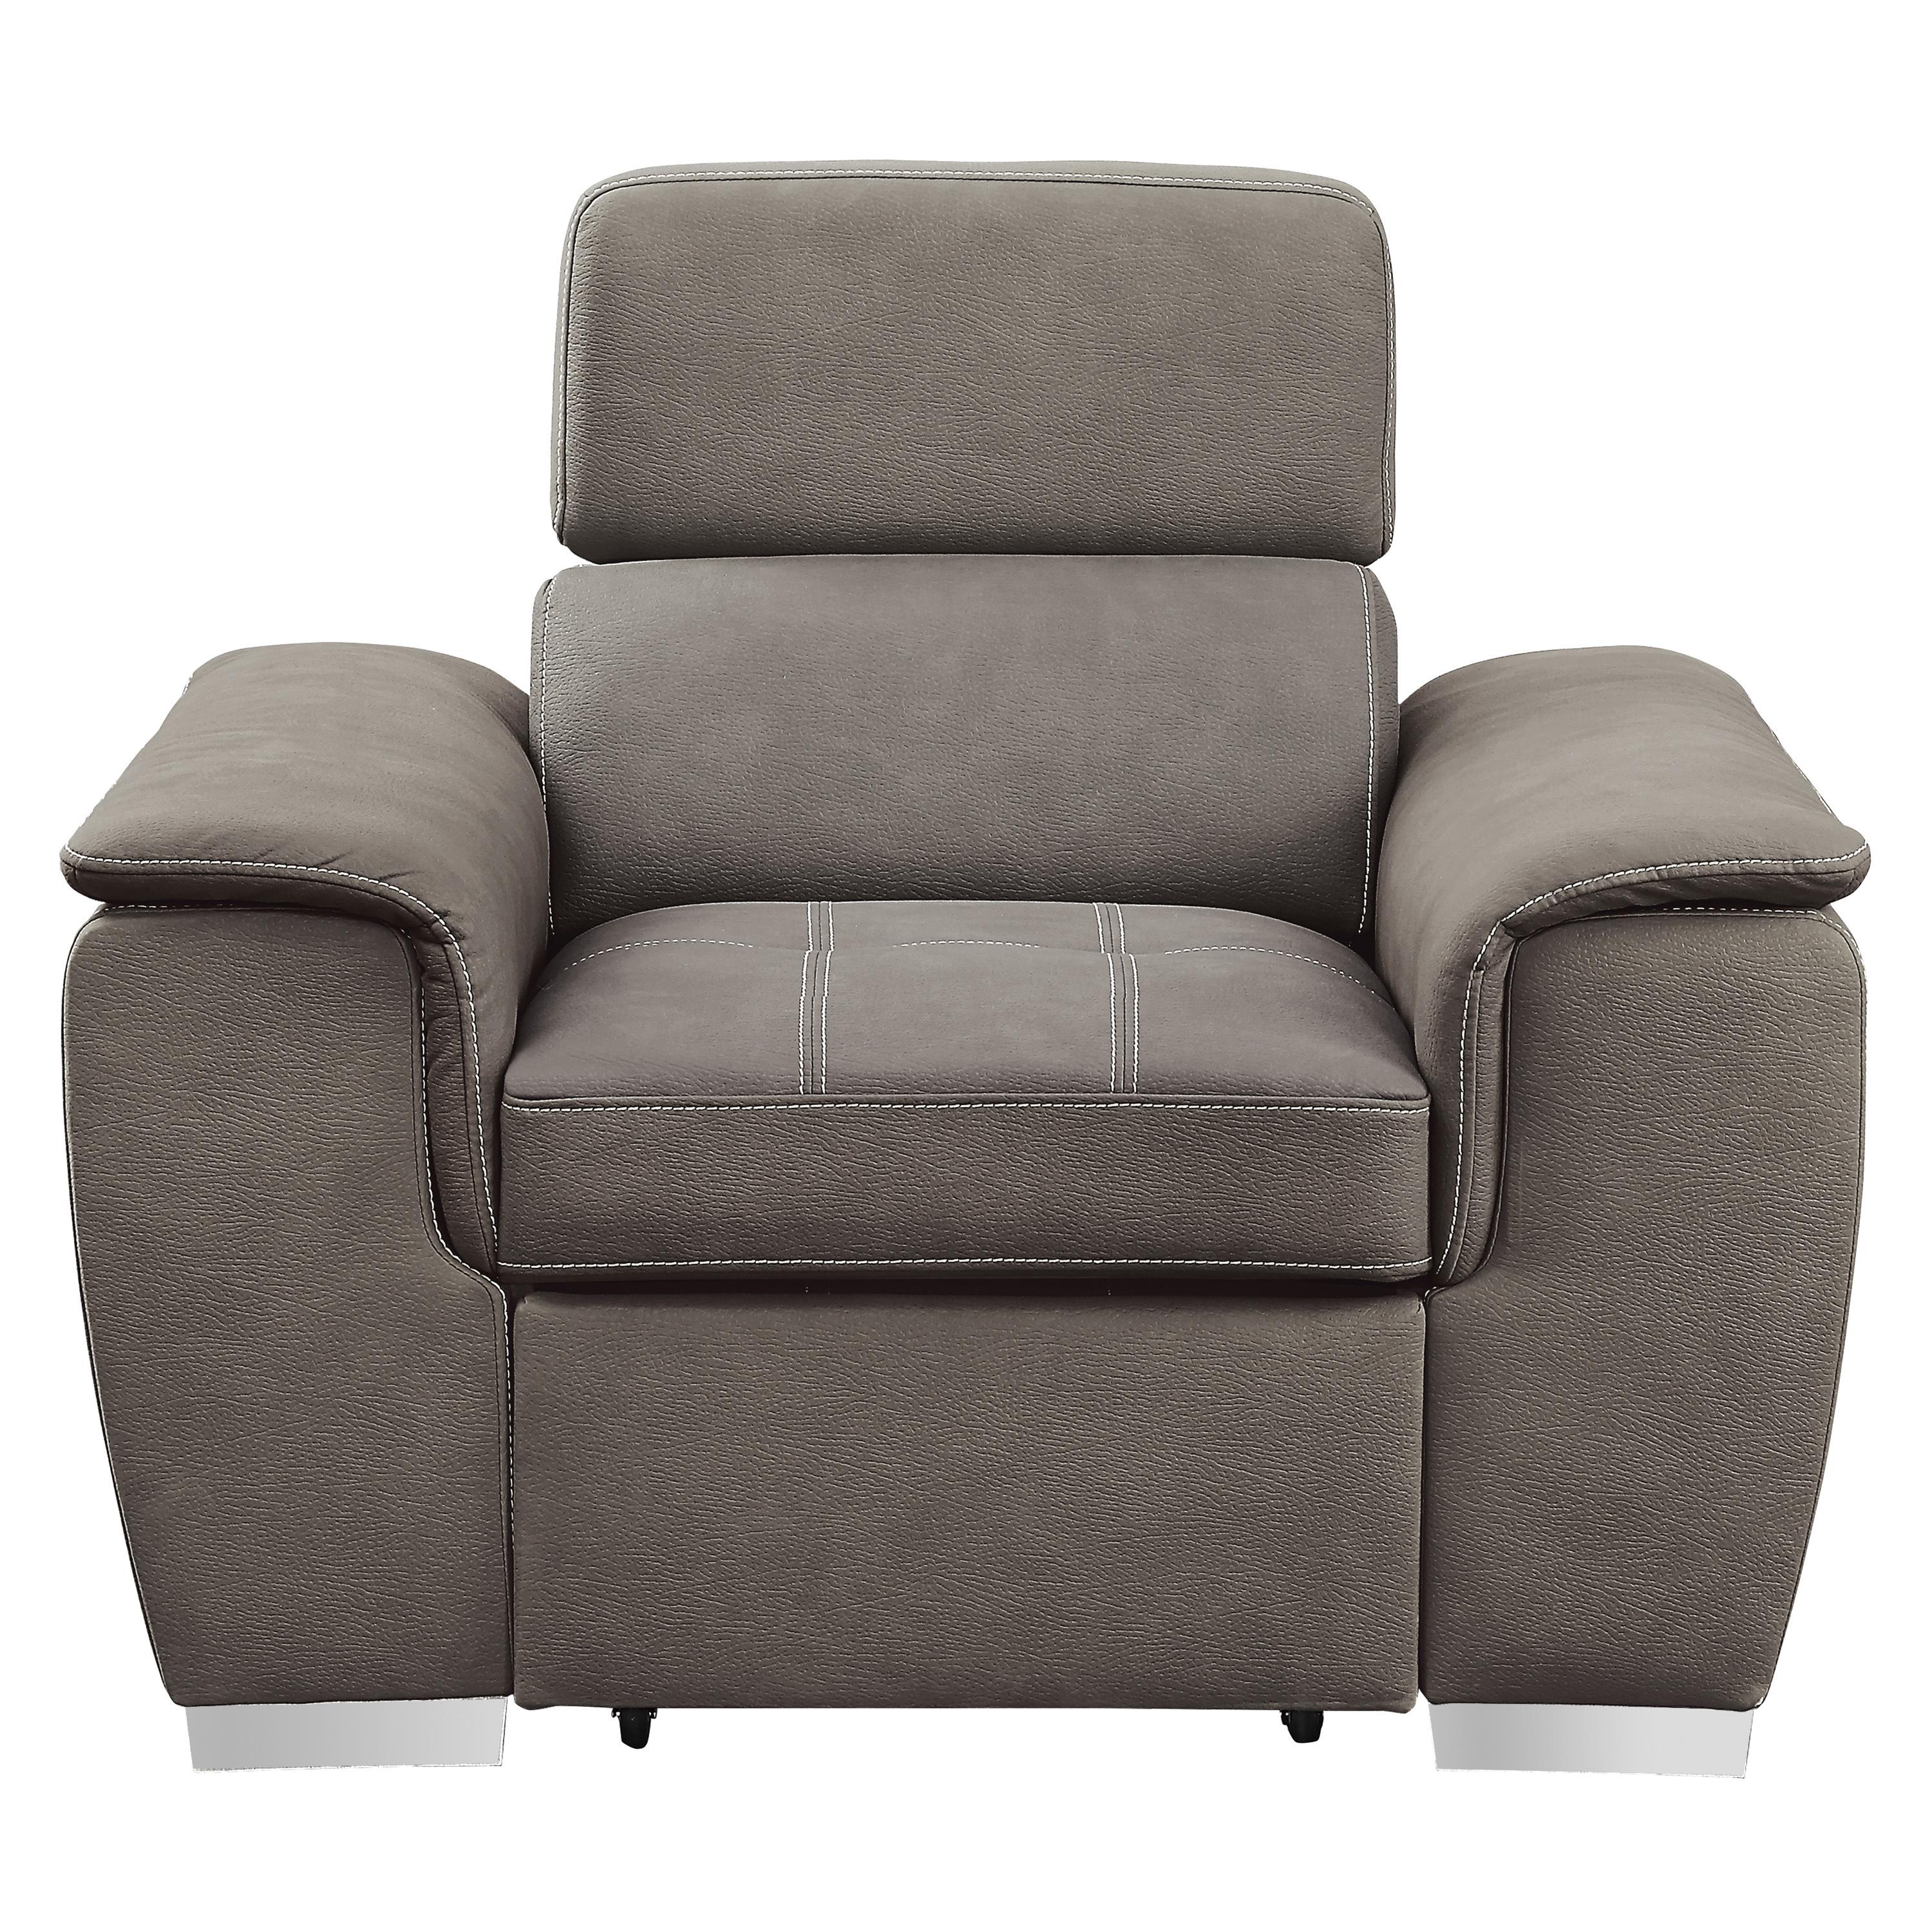 Contemporary Arm Chair 8228TP-1 Ferriday 8228TP-1 in Taupe Microfiber